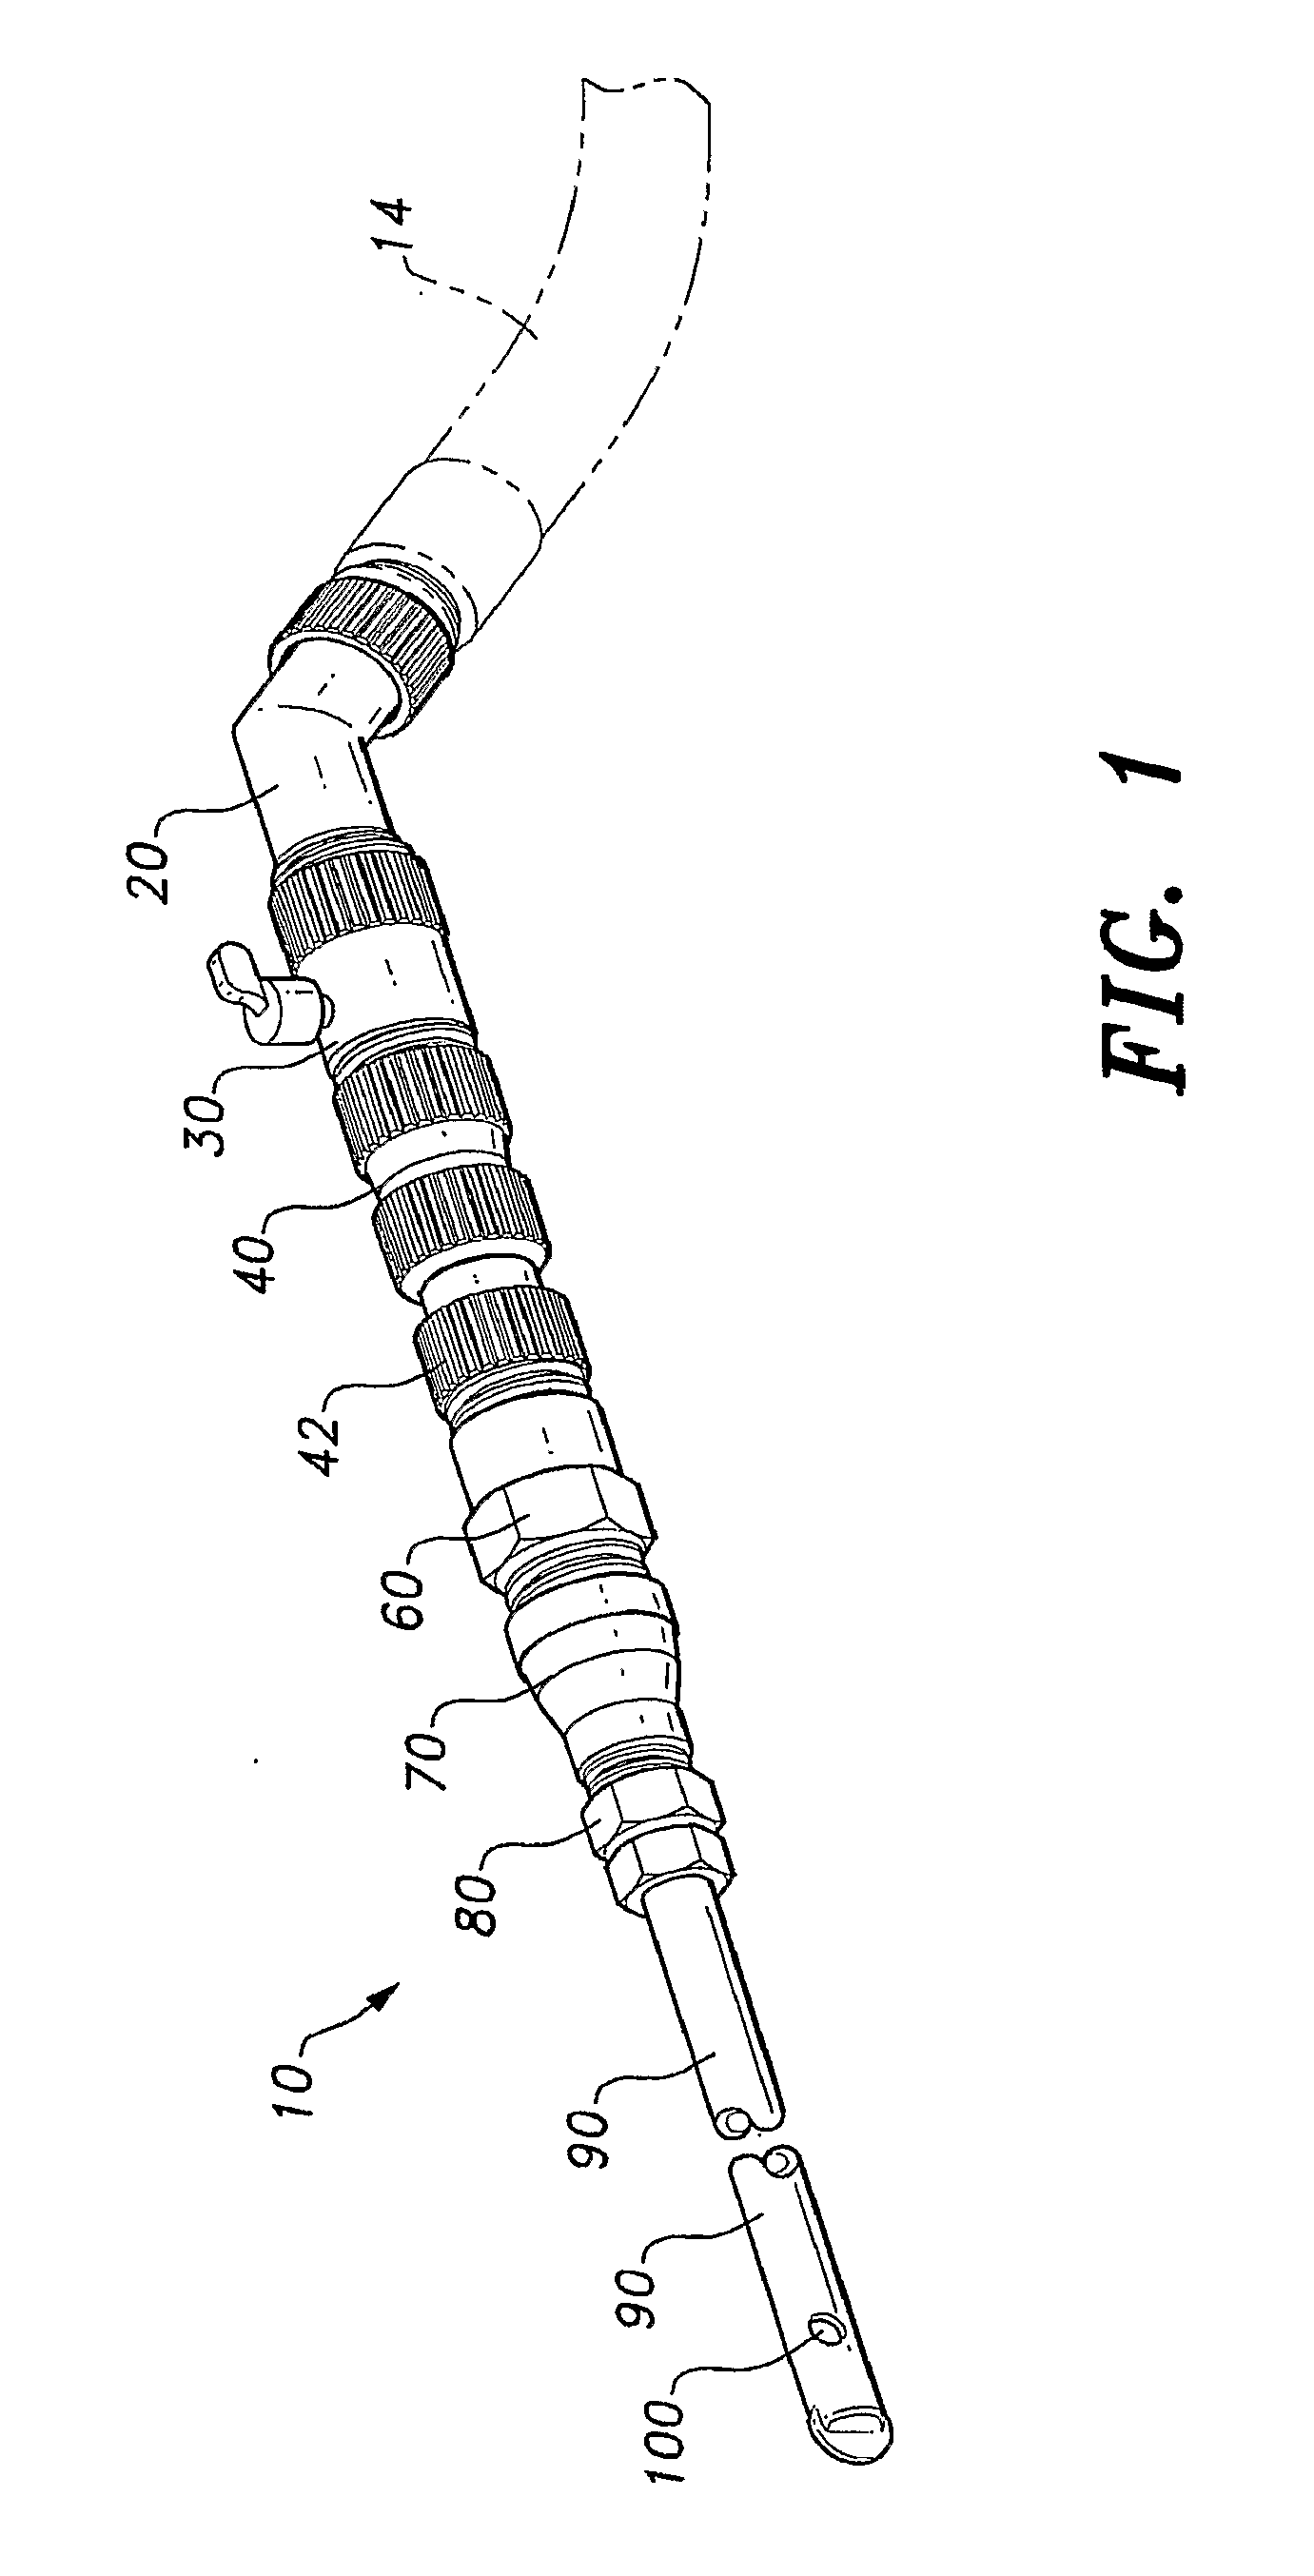 Cleaning Attachment for Water Hose